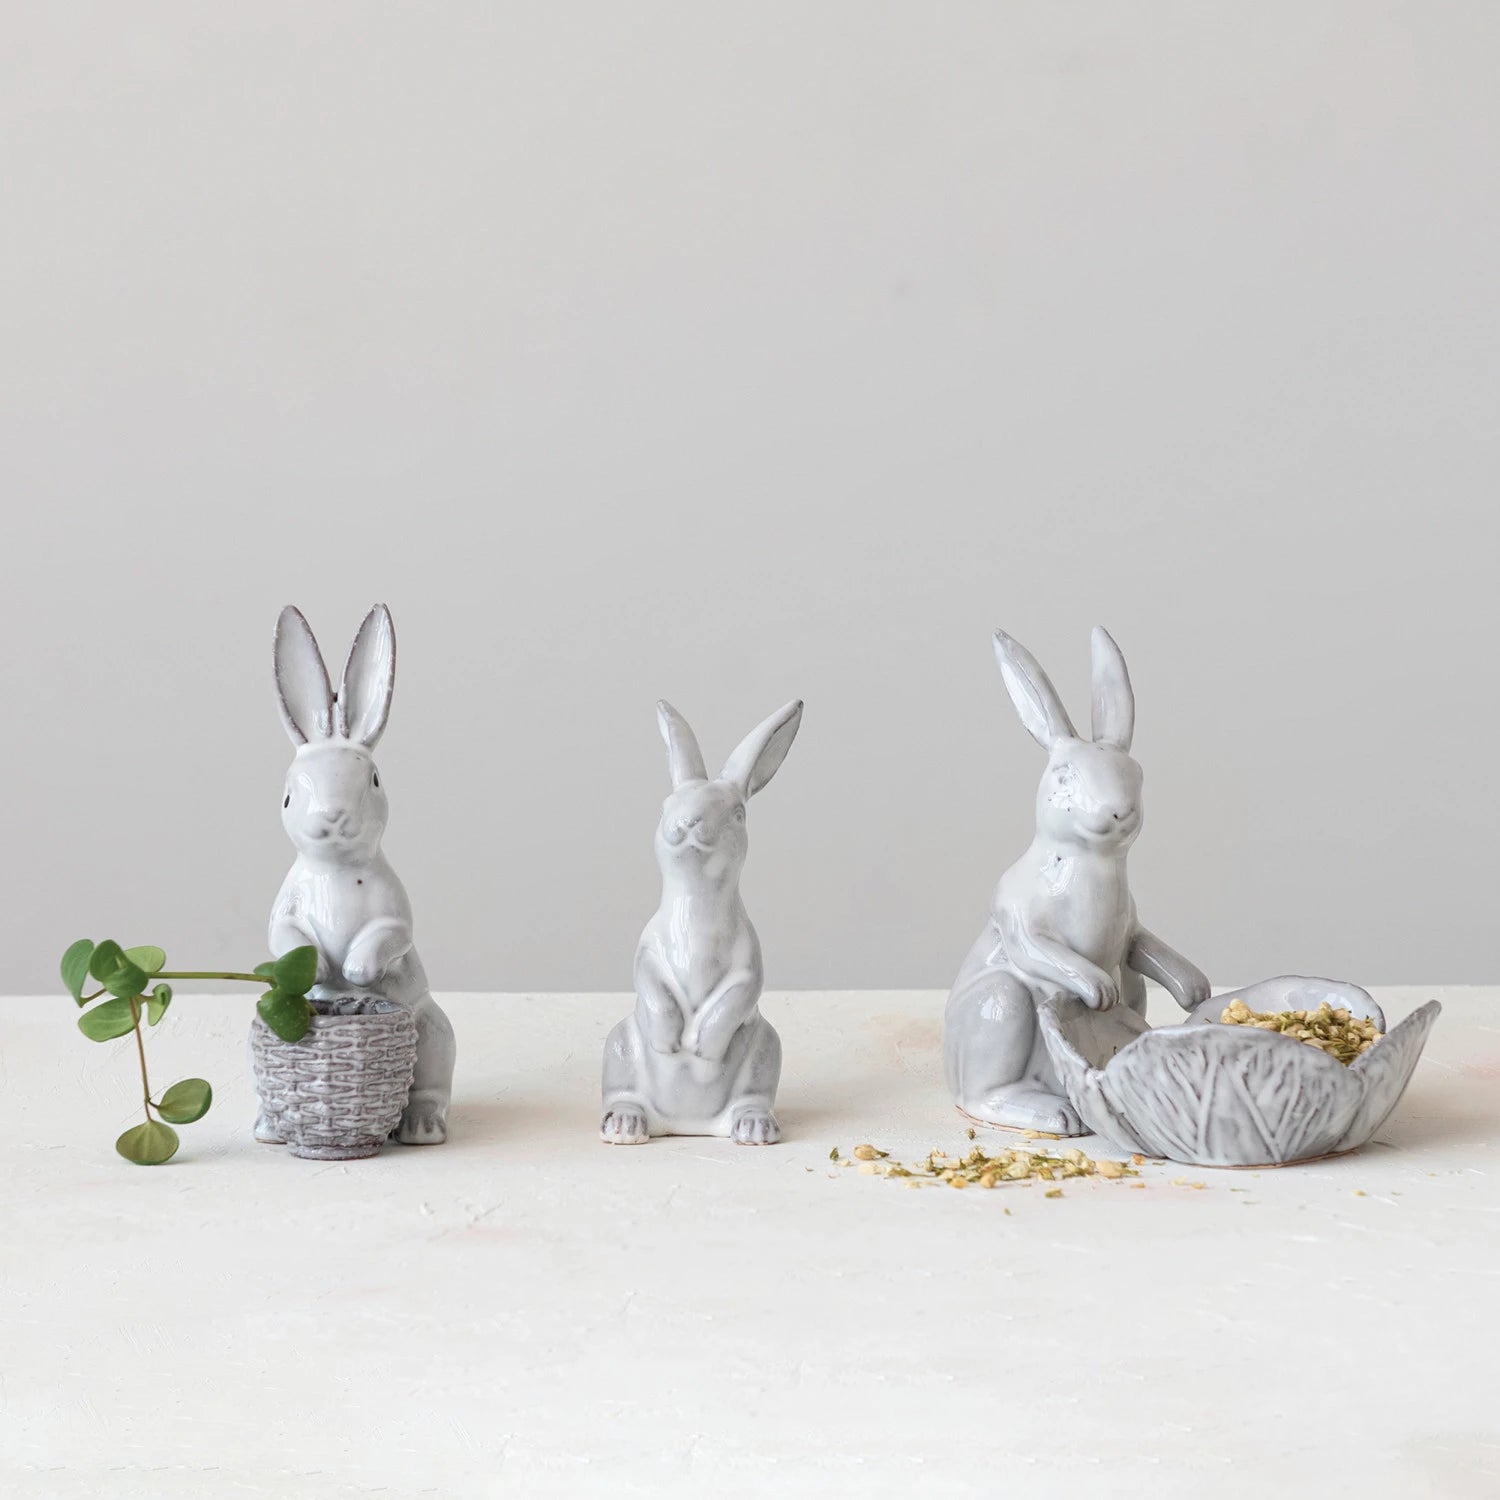 Neutral grey ceramic Peter Rabbit with matching ceramic bowl. Perfect addition to Spring tablescapes and Easter decor. #homedecor. Williams Sonoma